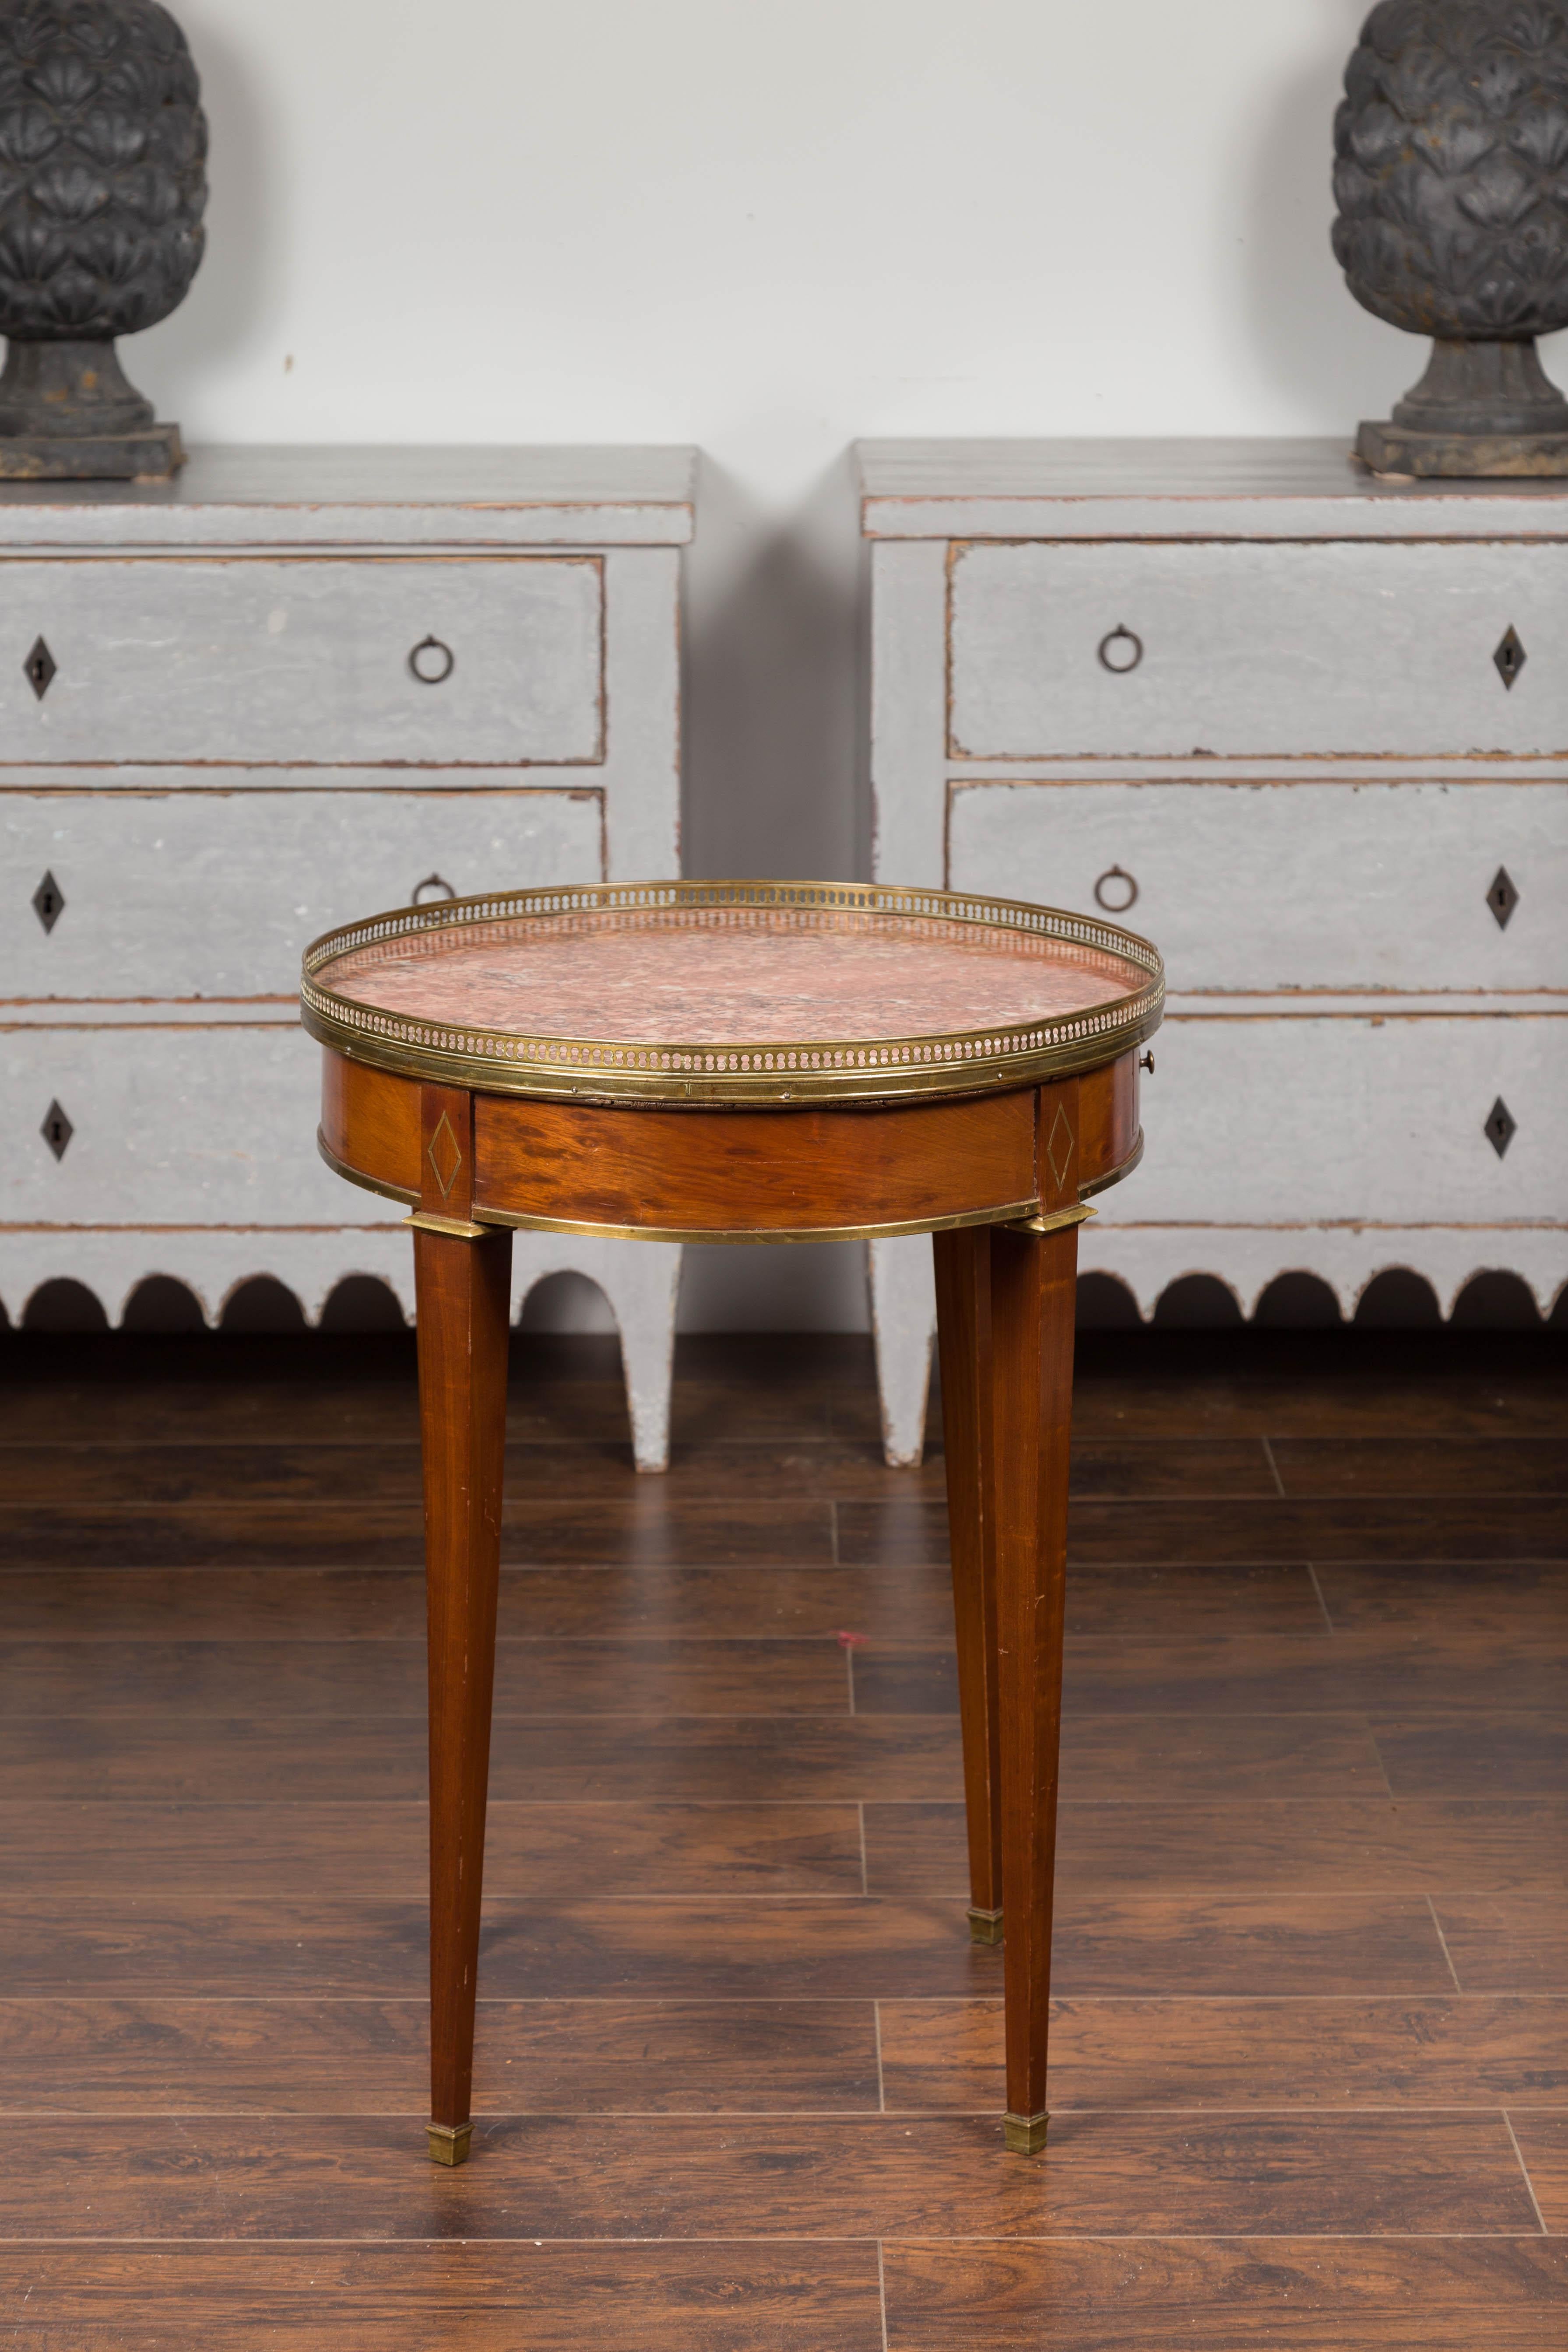 French 1870s Empire Style Round Table with Marble Top, Brass Gallery and Drawer For Sale 3